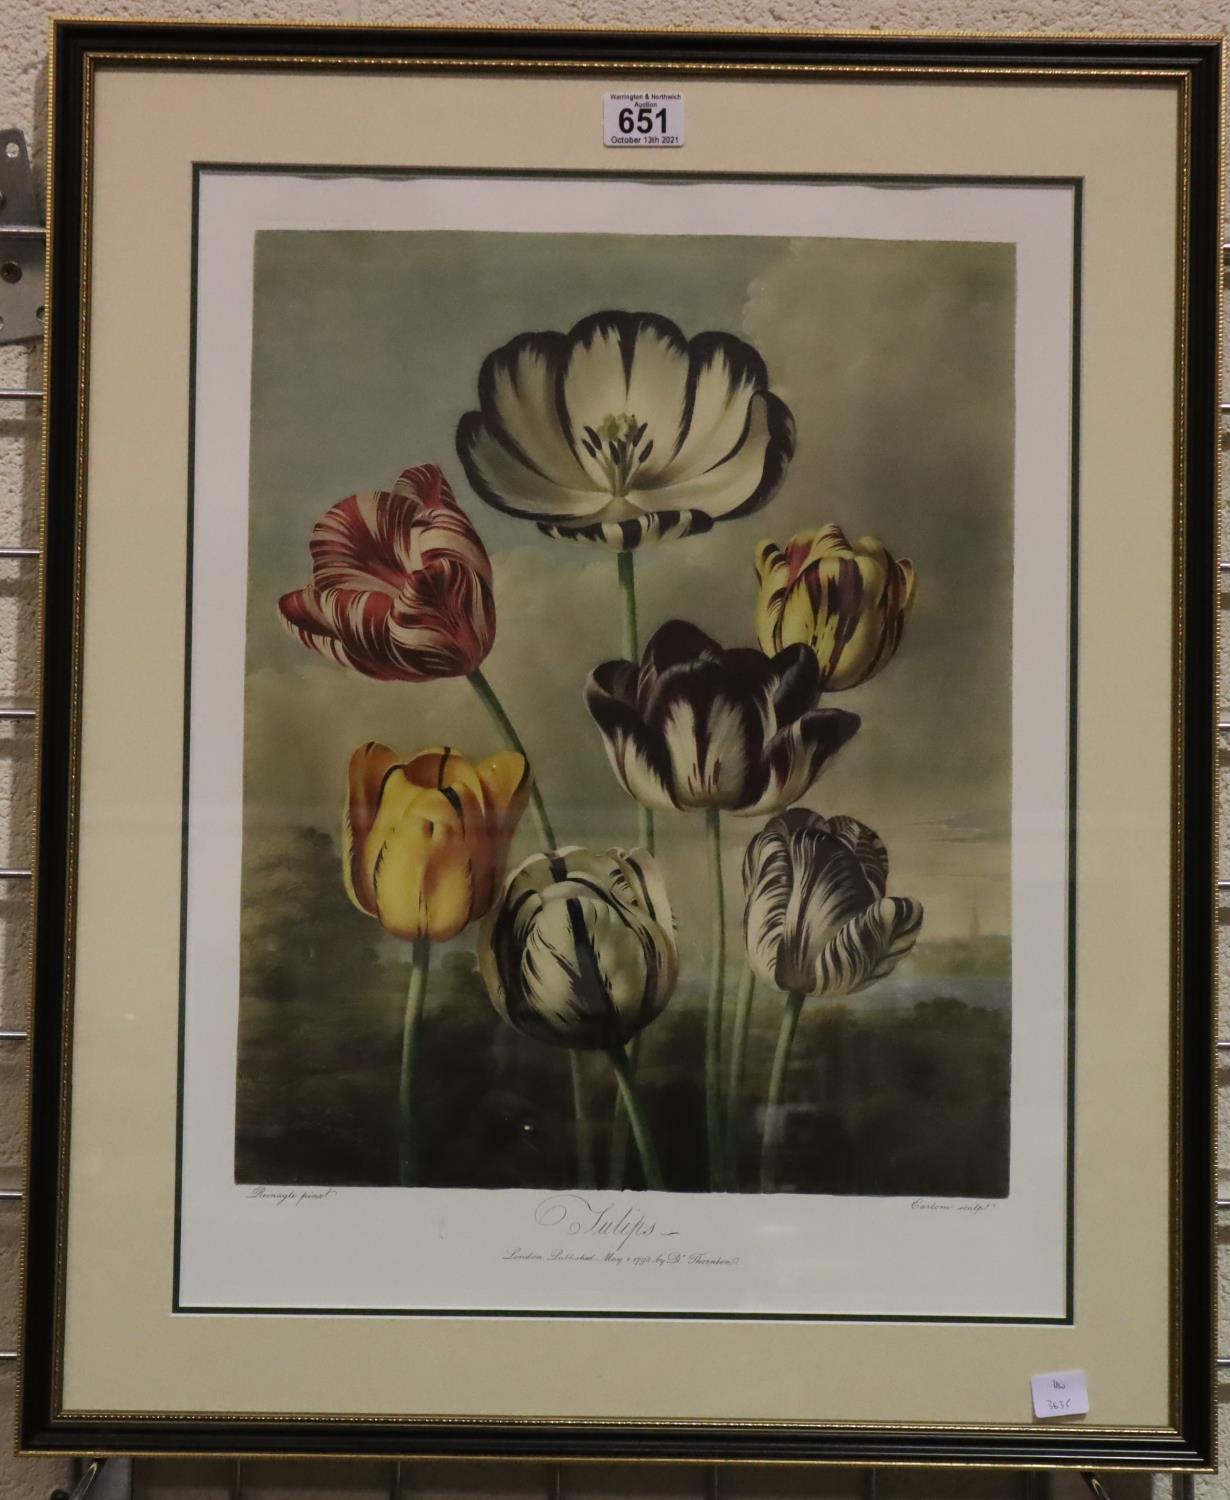 Robert John Thornton (1768 - 1837); floral print, first published 1805, 39 x 51 cm. Not available - Image 2 of 3